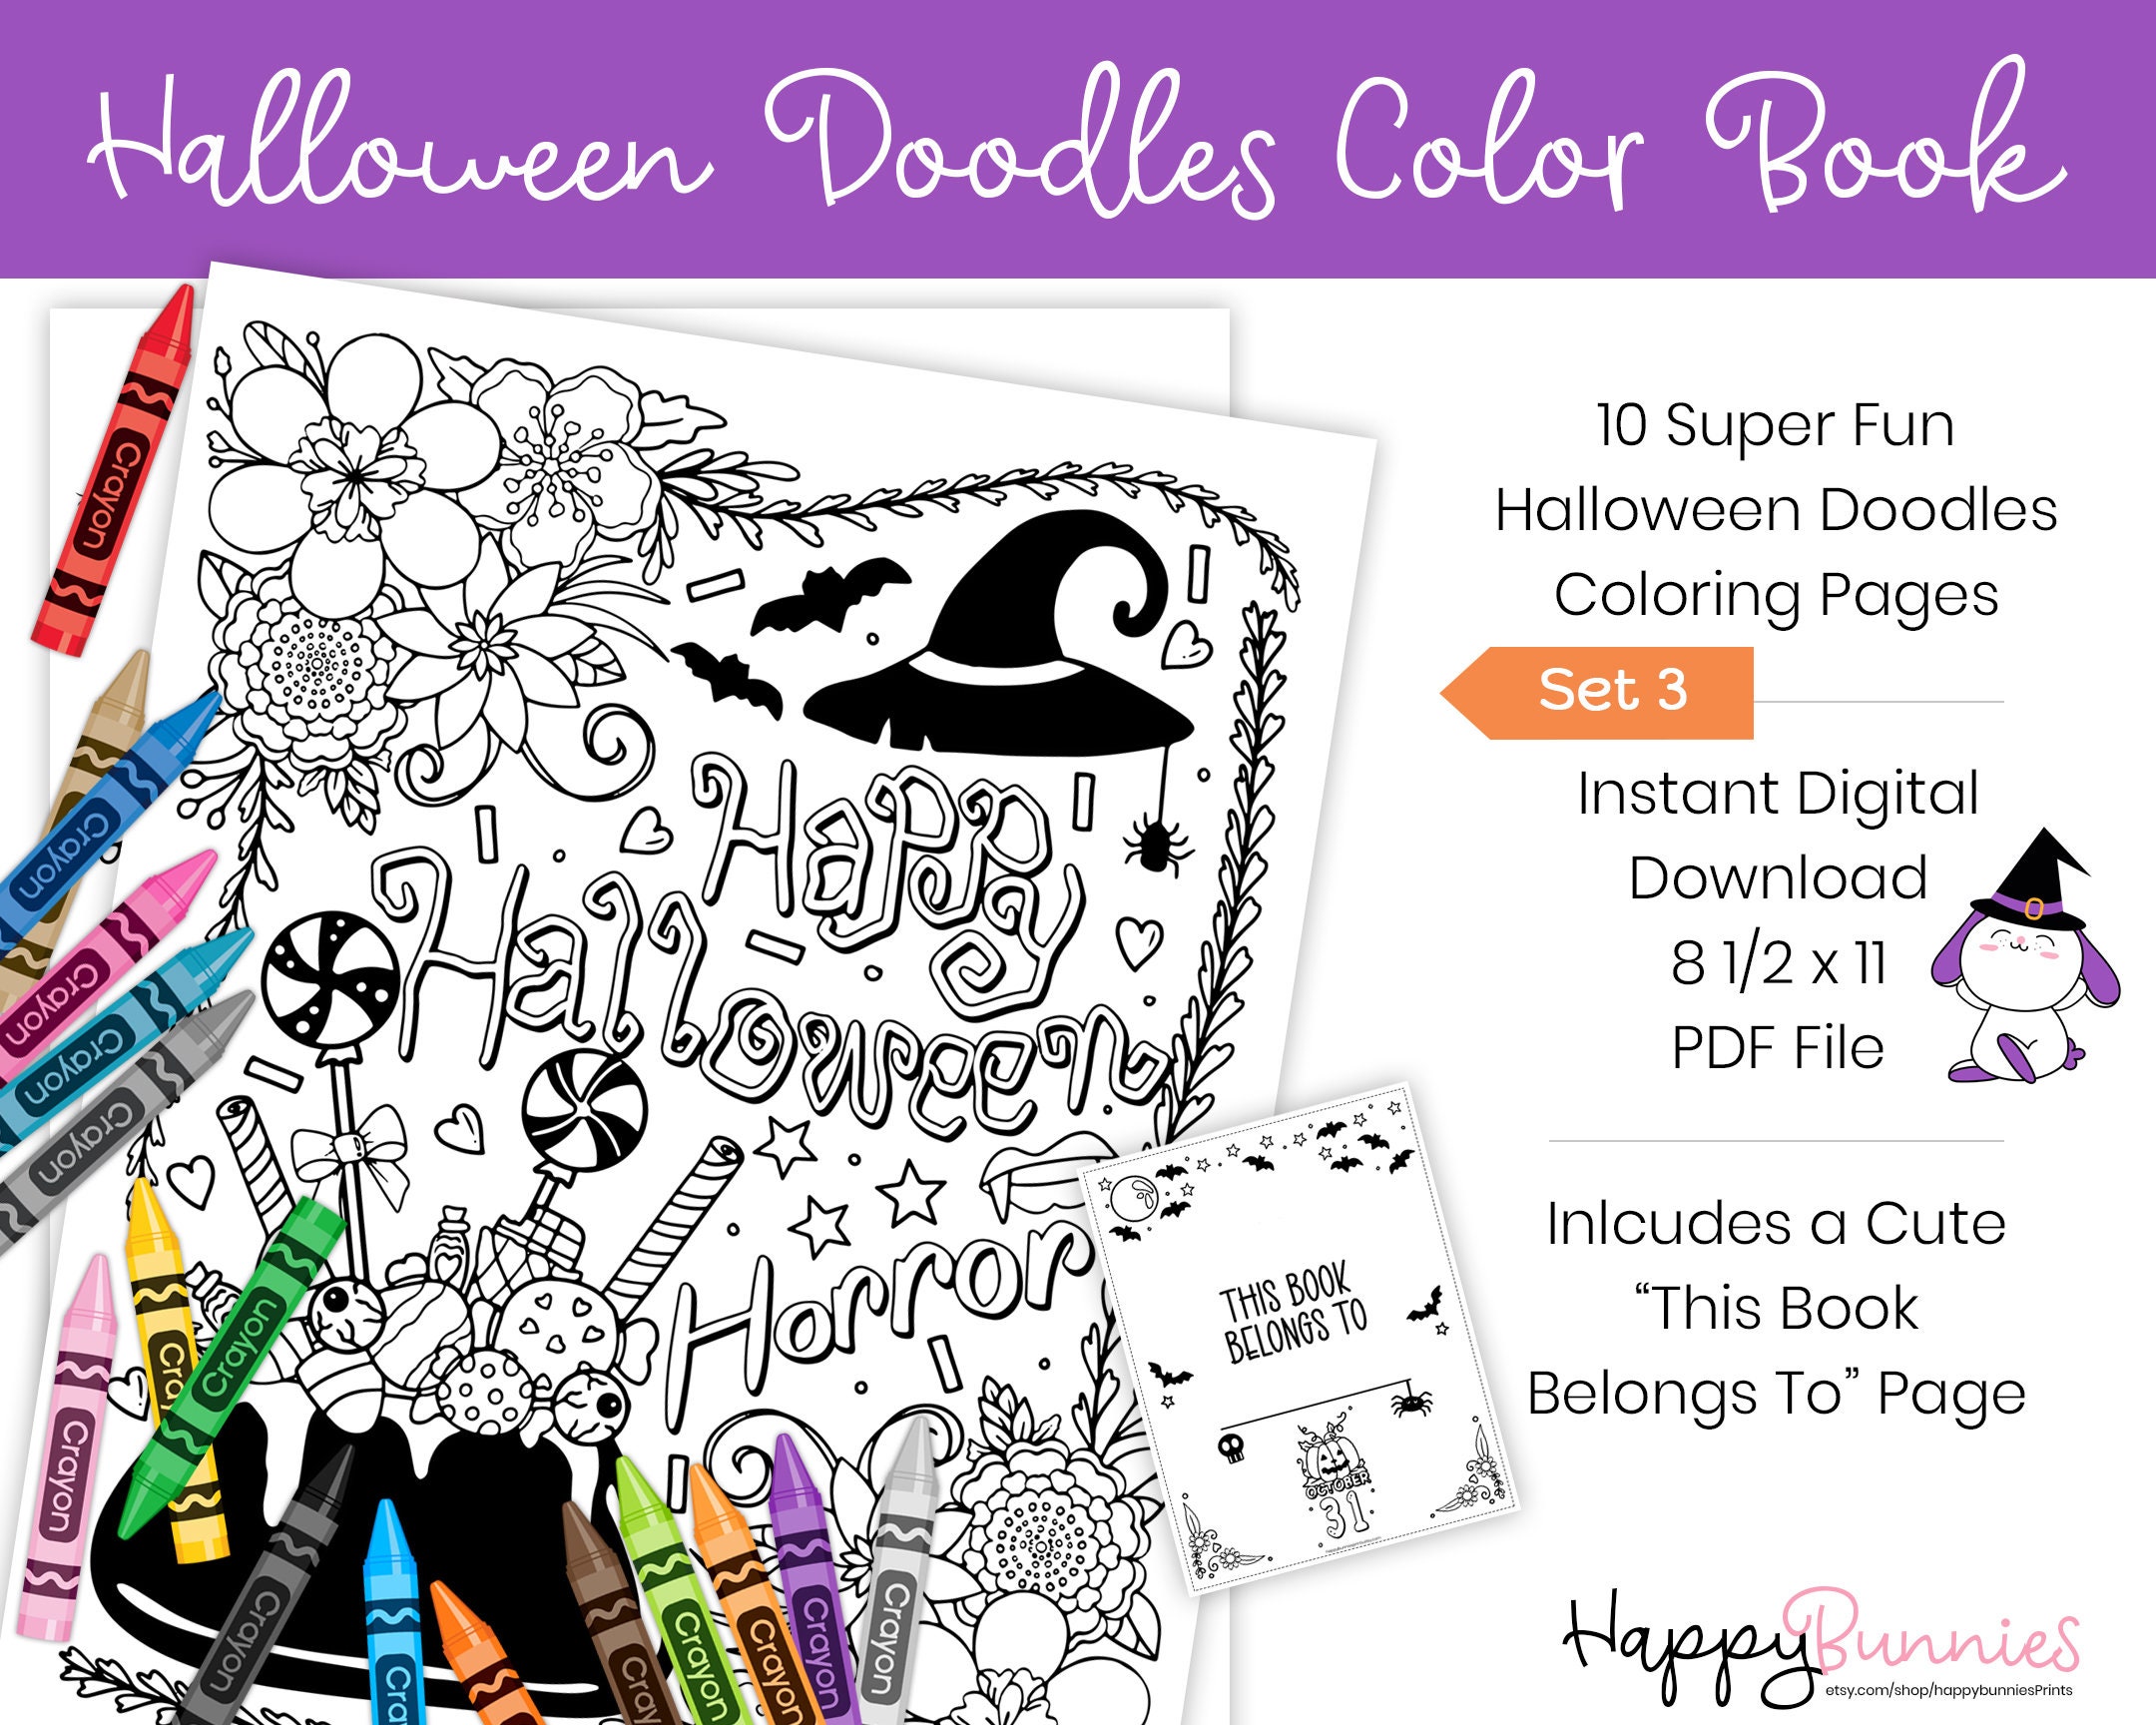 Inspiration. Coloring for Adults and Kid Graphic by VividDoodle